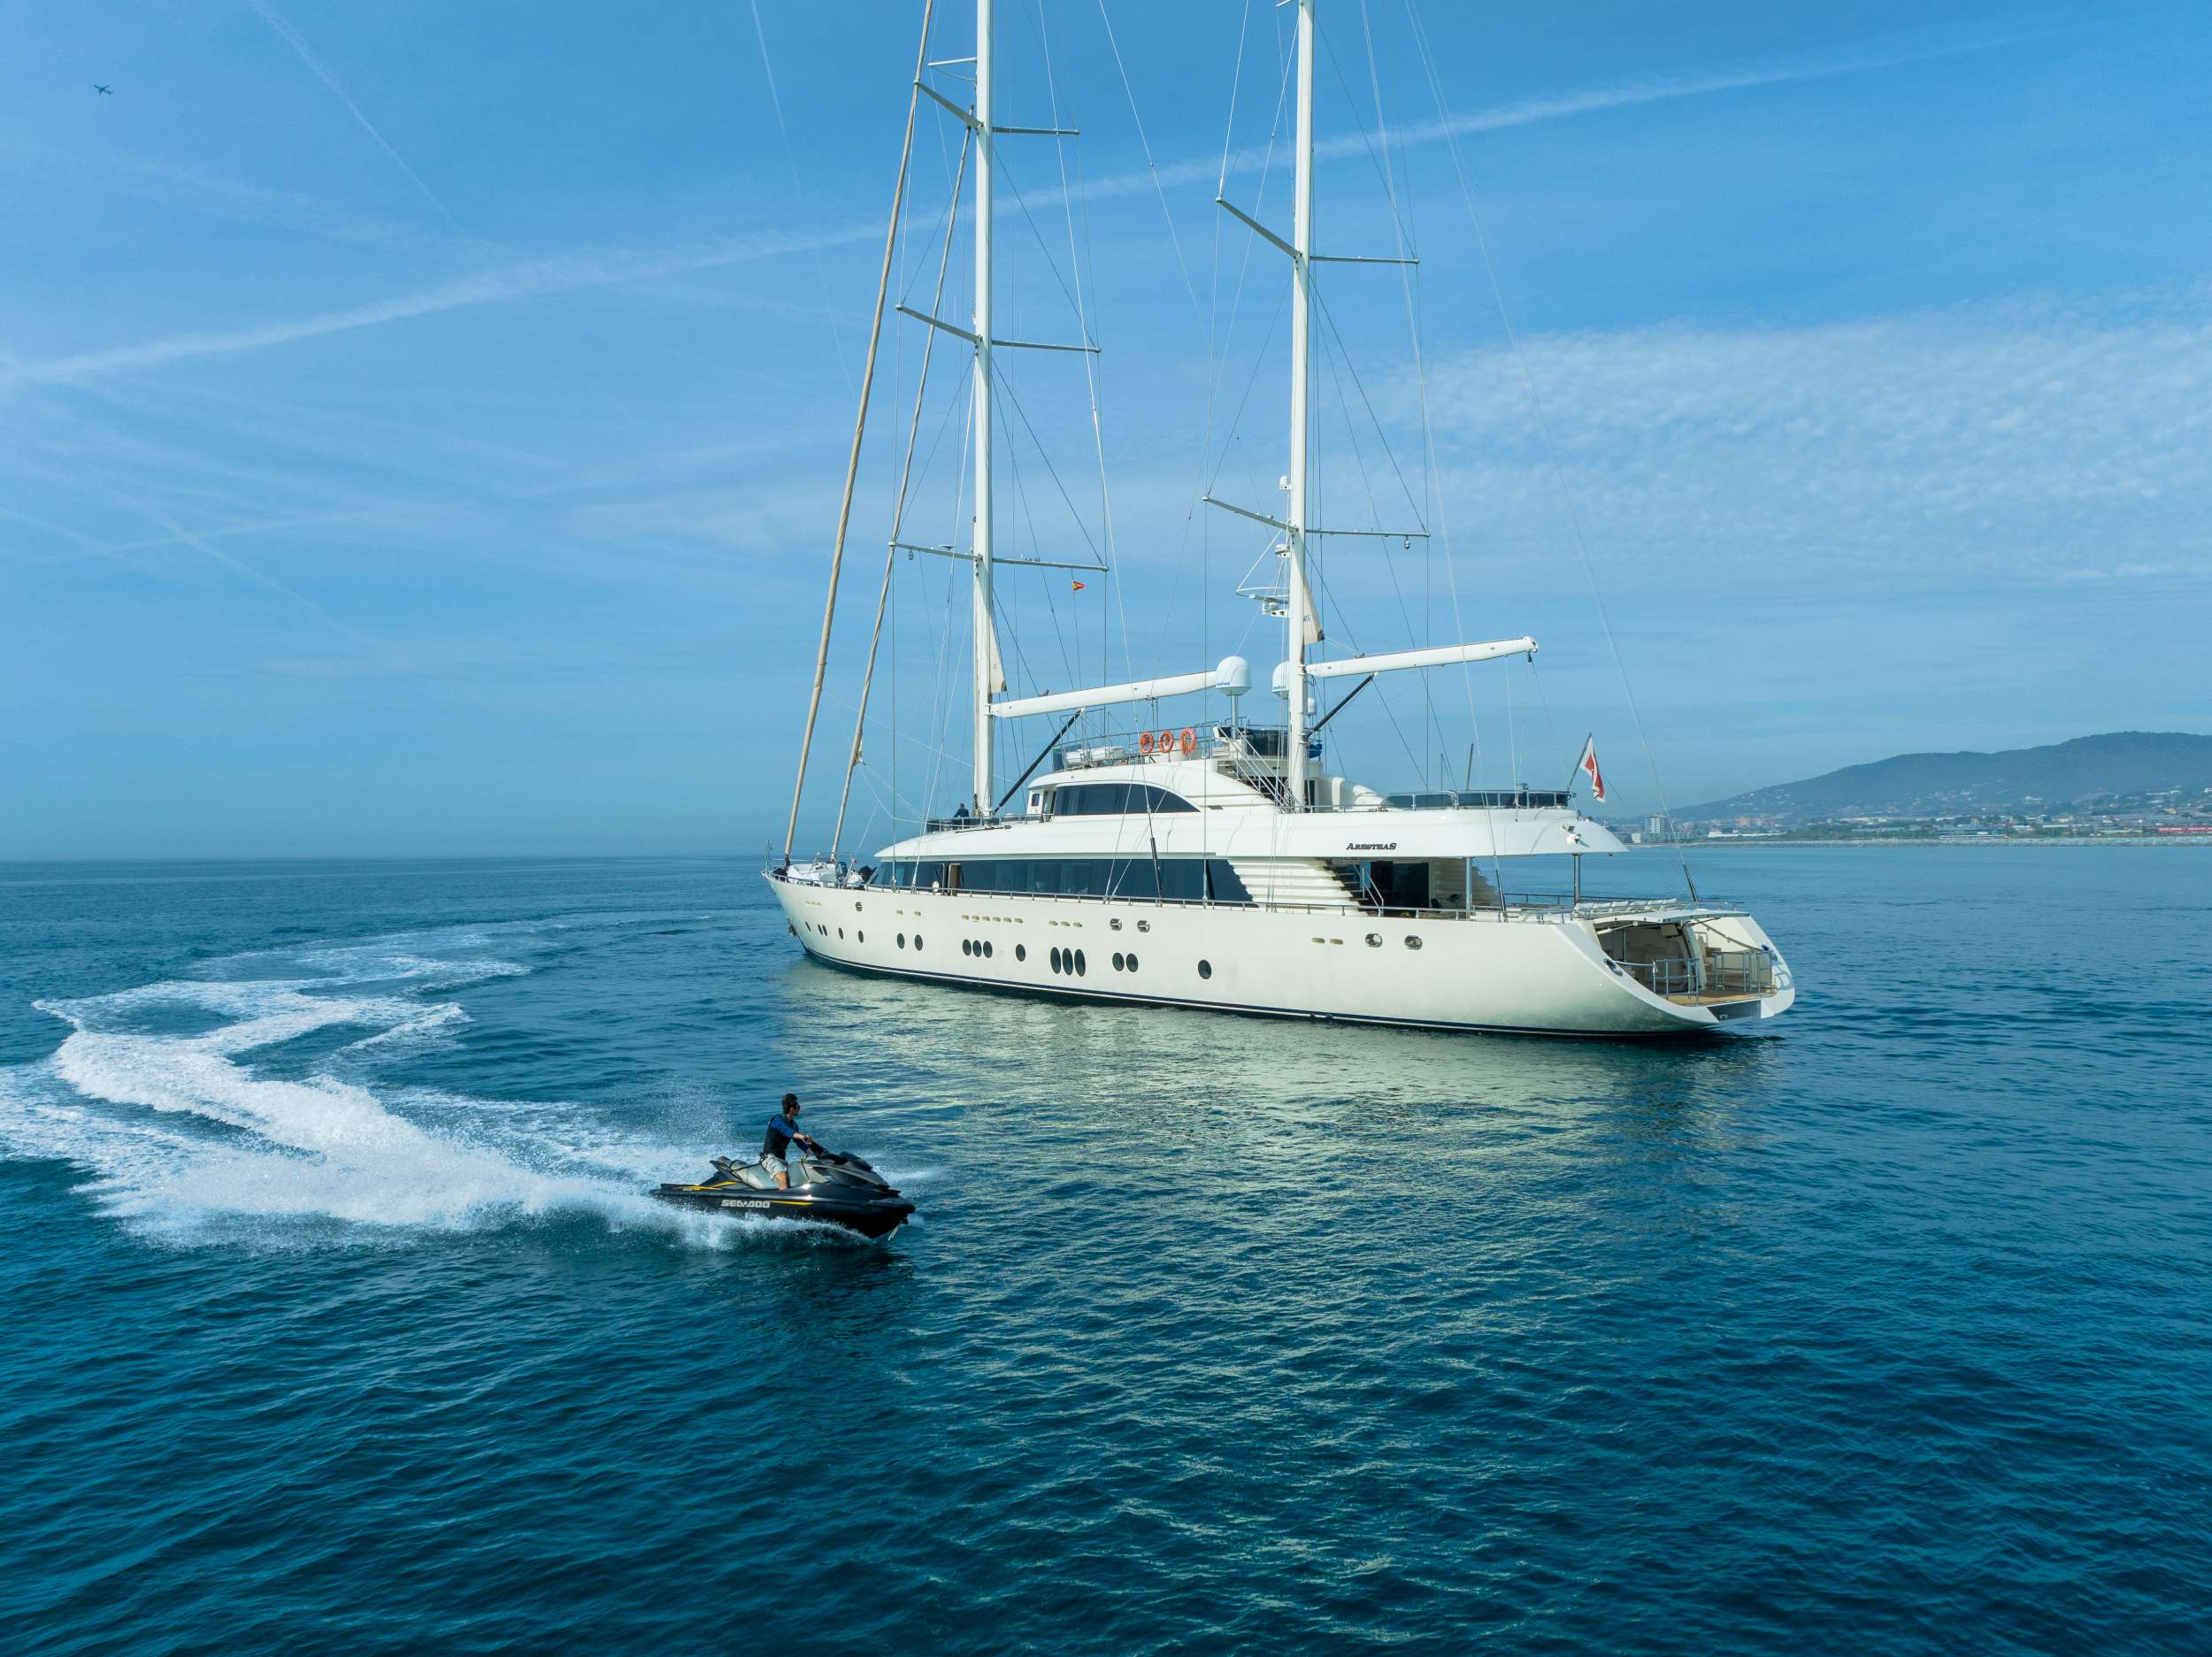 ARESTEAS - Yacht Charter Slovenia & Boat hire in W. Med -Naples/Sicily, W. Med -Riviera/Cors/Sard., W. Med - Spain/Balearics 1